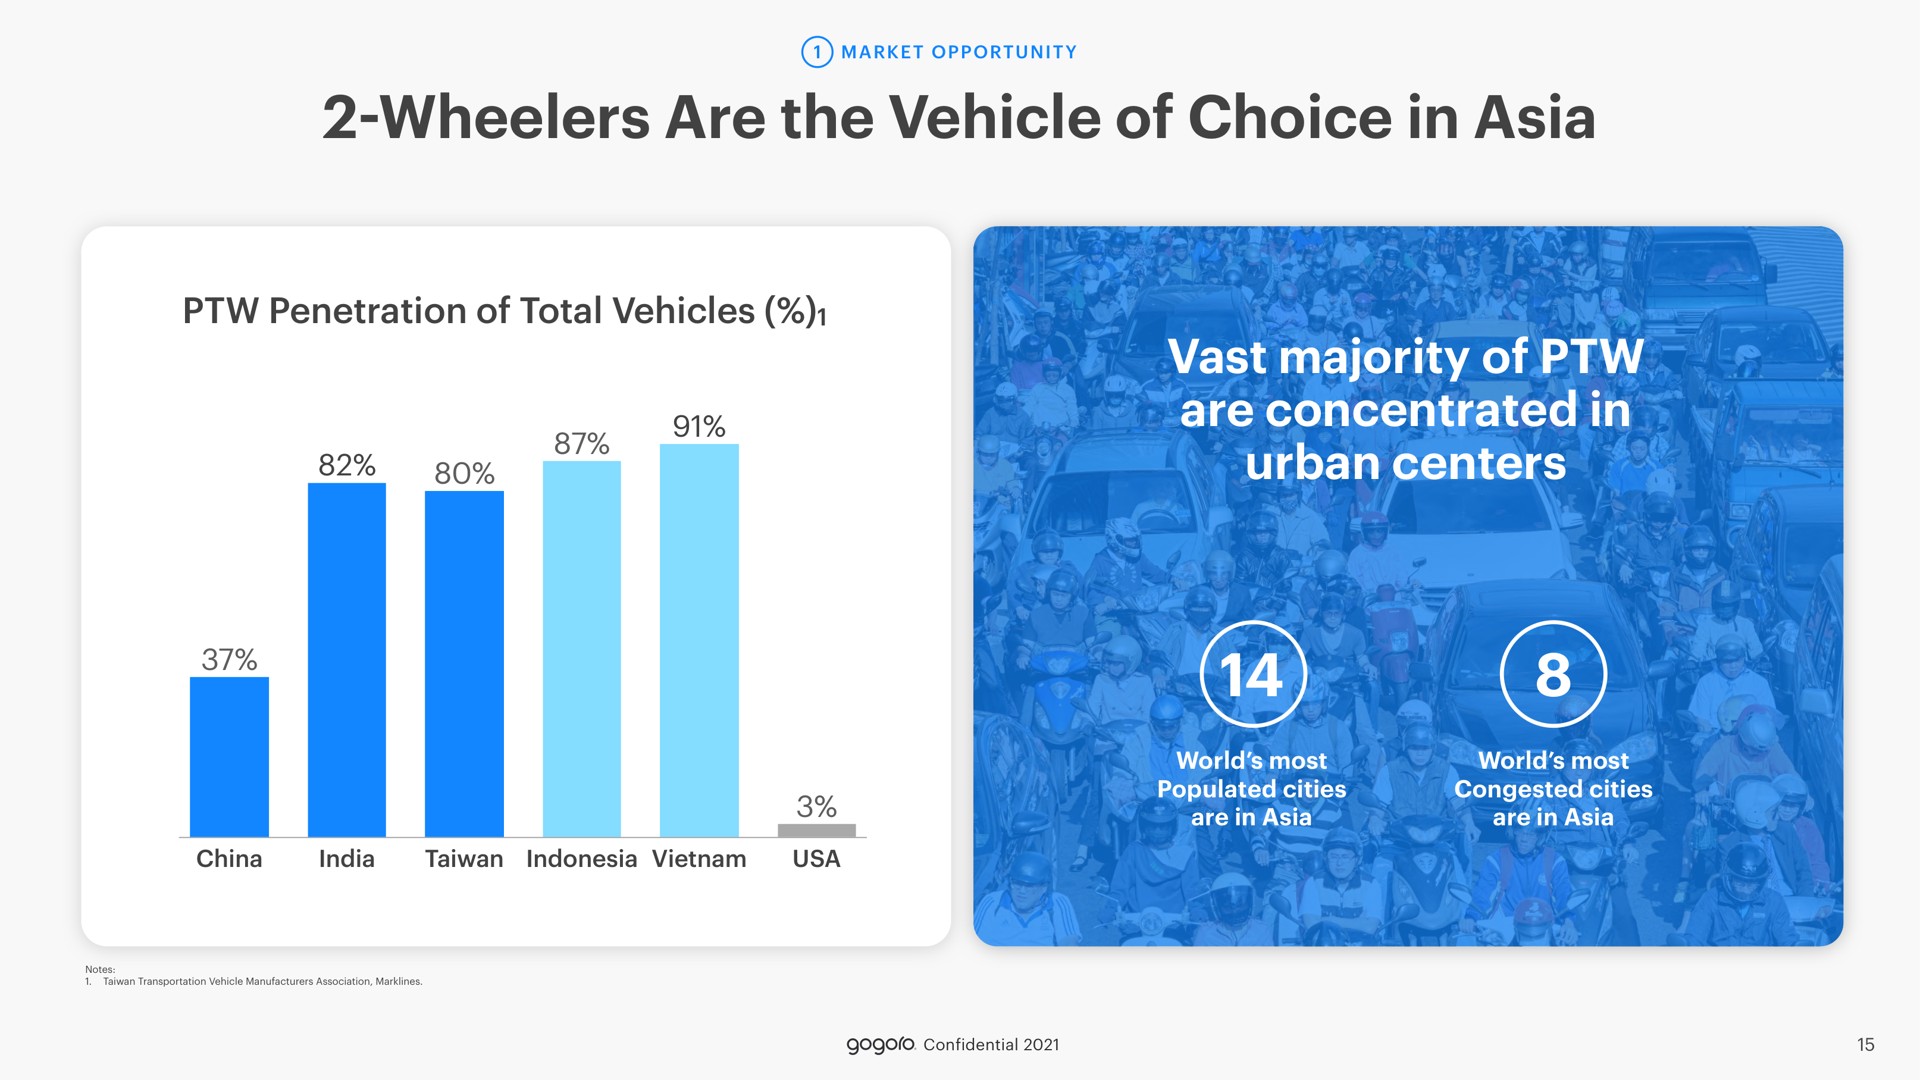 wheelers are the vehicle of choice in vast majority of are concentrated in urban centers | Gogoro